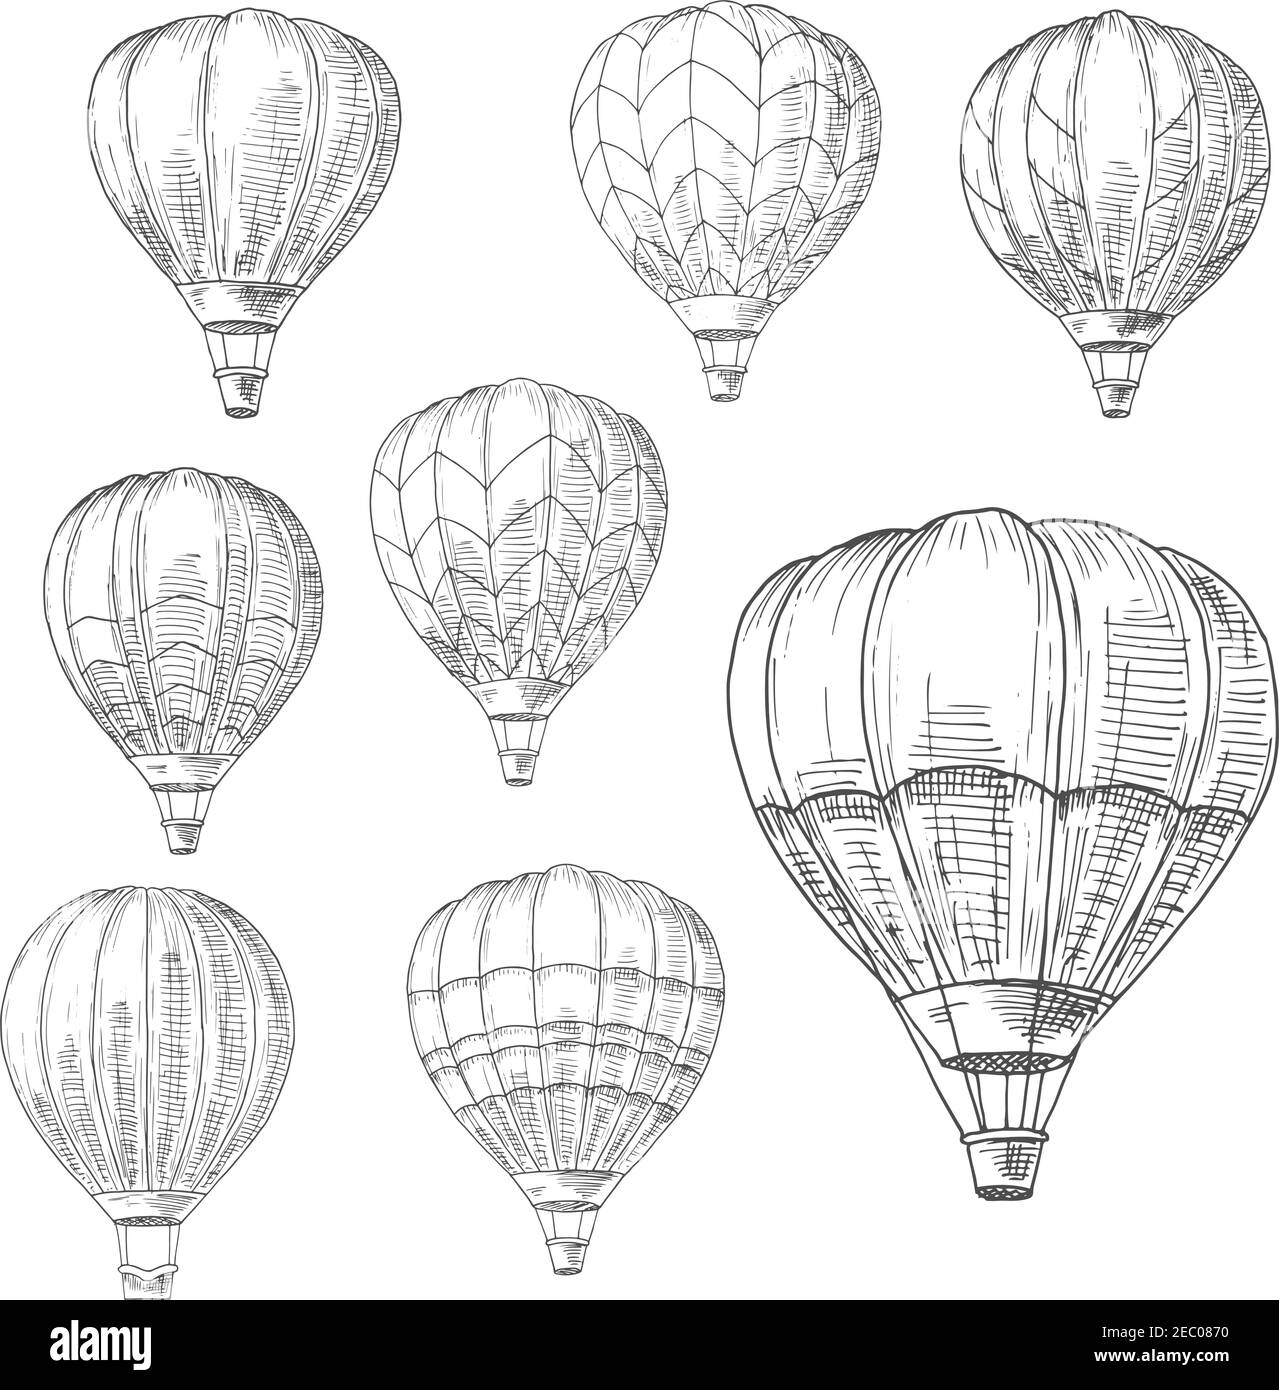 Hot air balloons in flight with decorative inverted teardrop shaped envelopes and wicker baskets. Romantic air travel, adventure or tourism design usa Stock Vector